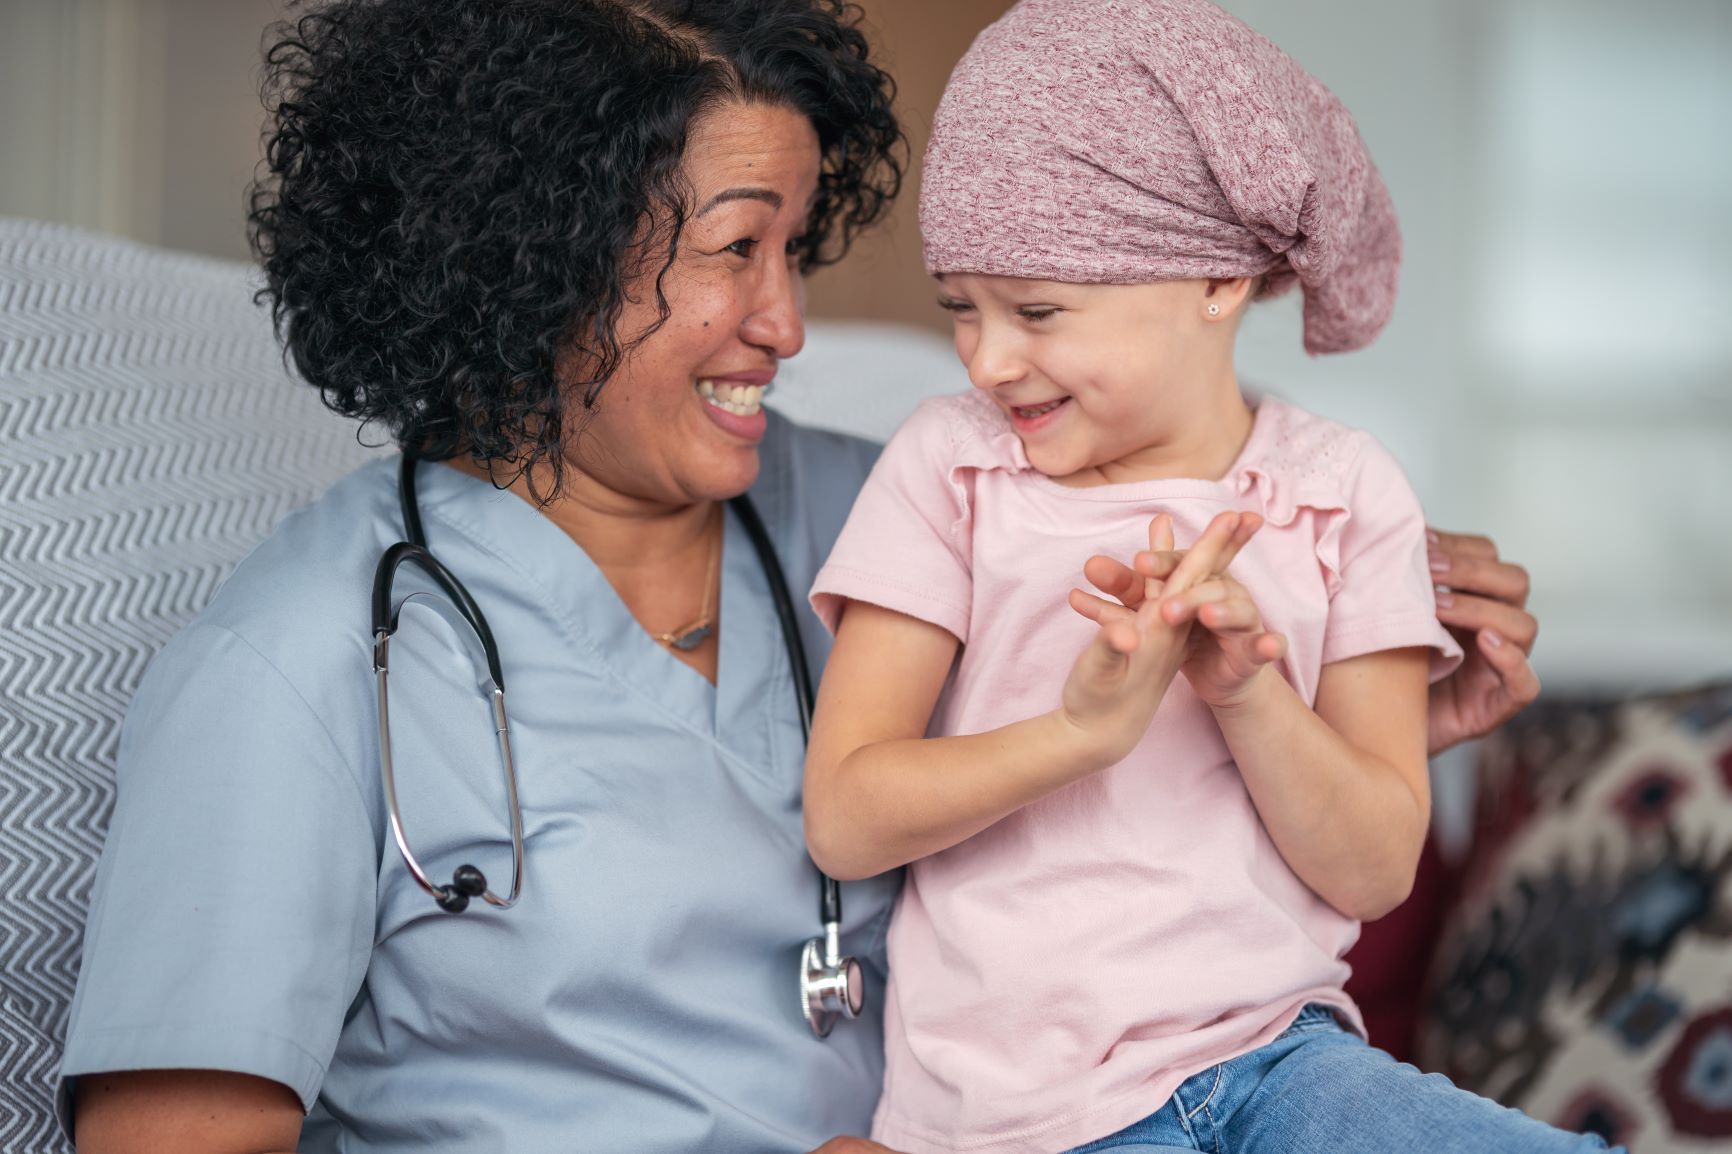 A female doctor of Asian descent sits with a child patient who is fighting cancer. The patient is a preschool age caucasian girl. She is wearing a pink bandana to hide her hair loss from chemotherapy treatment. The doctor is embracing the child. They are talking and the doctor is comforting the sick girl.